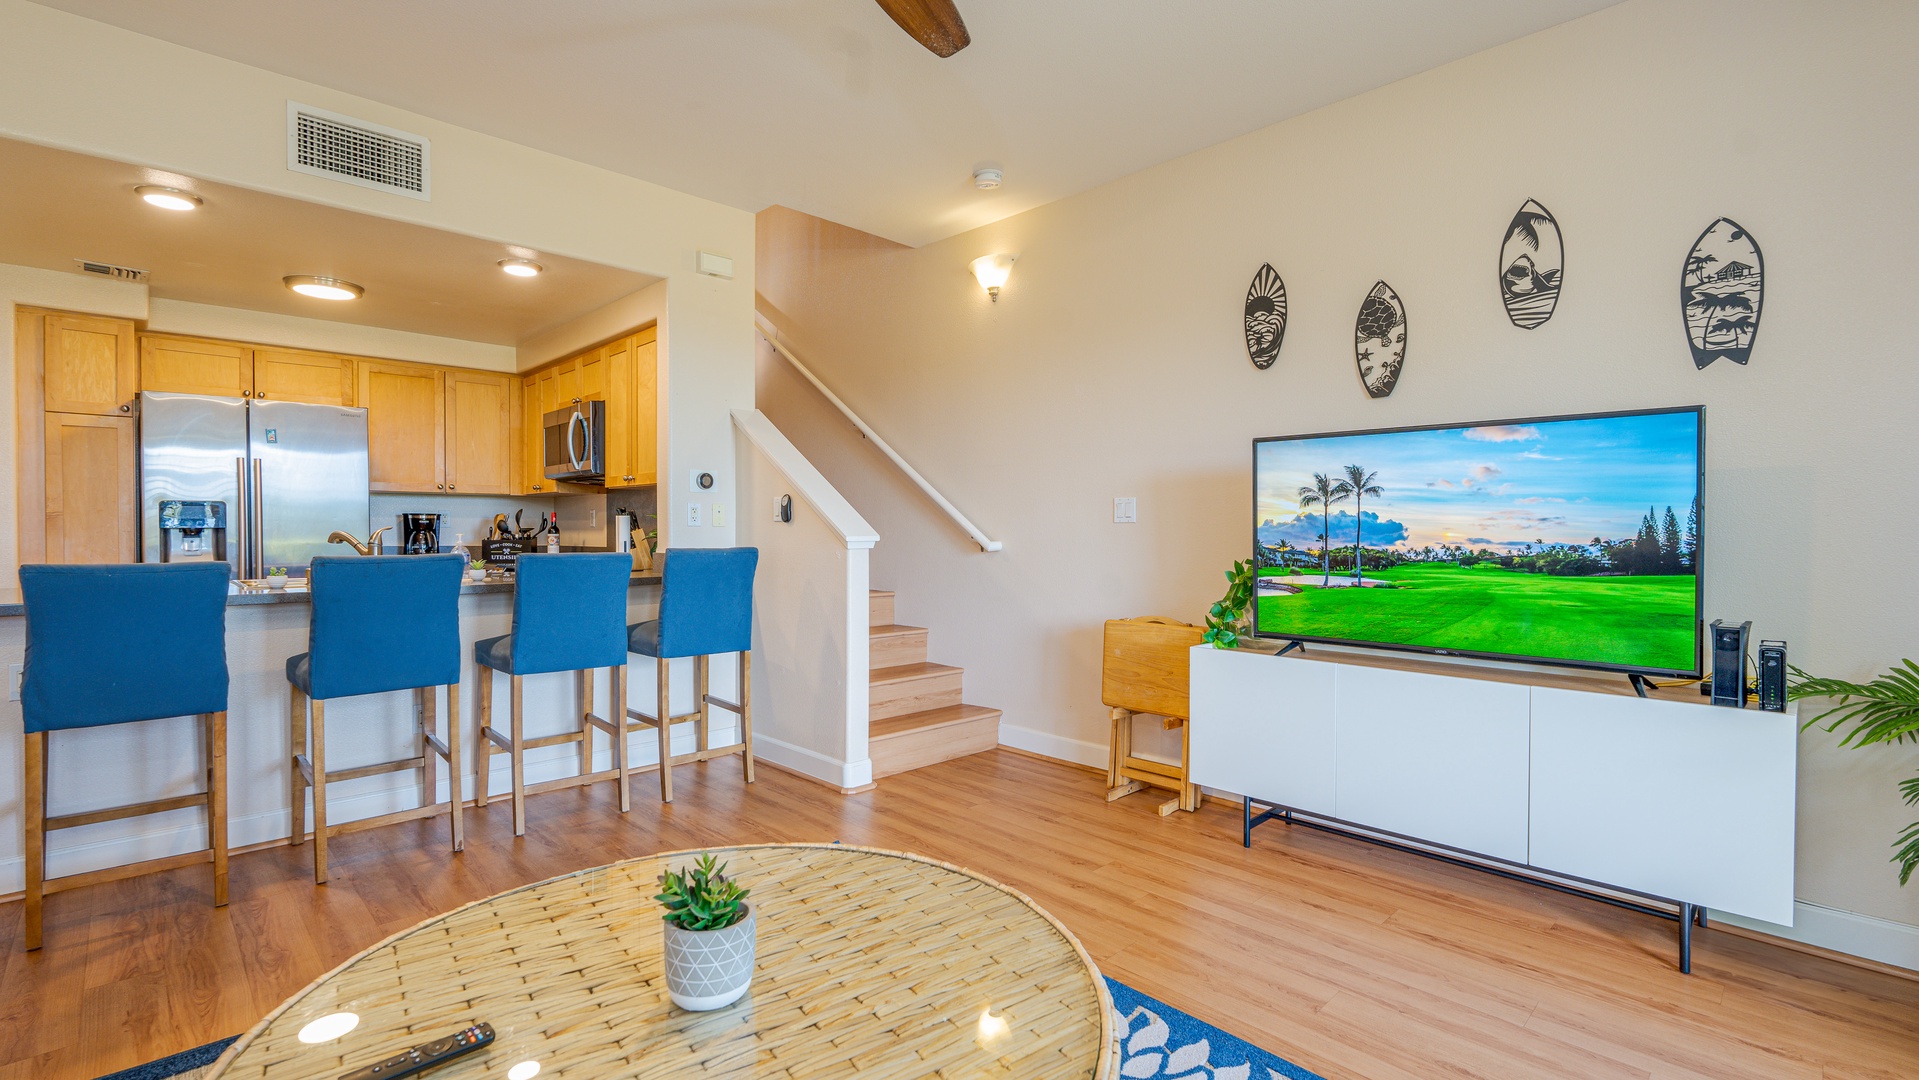 Kapolei Vacation Rentals, Hillside Villas 1496-2 - Expansive space includes the kitchen, living and common seating areas.